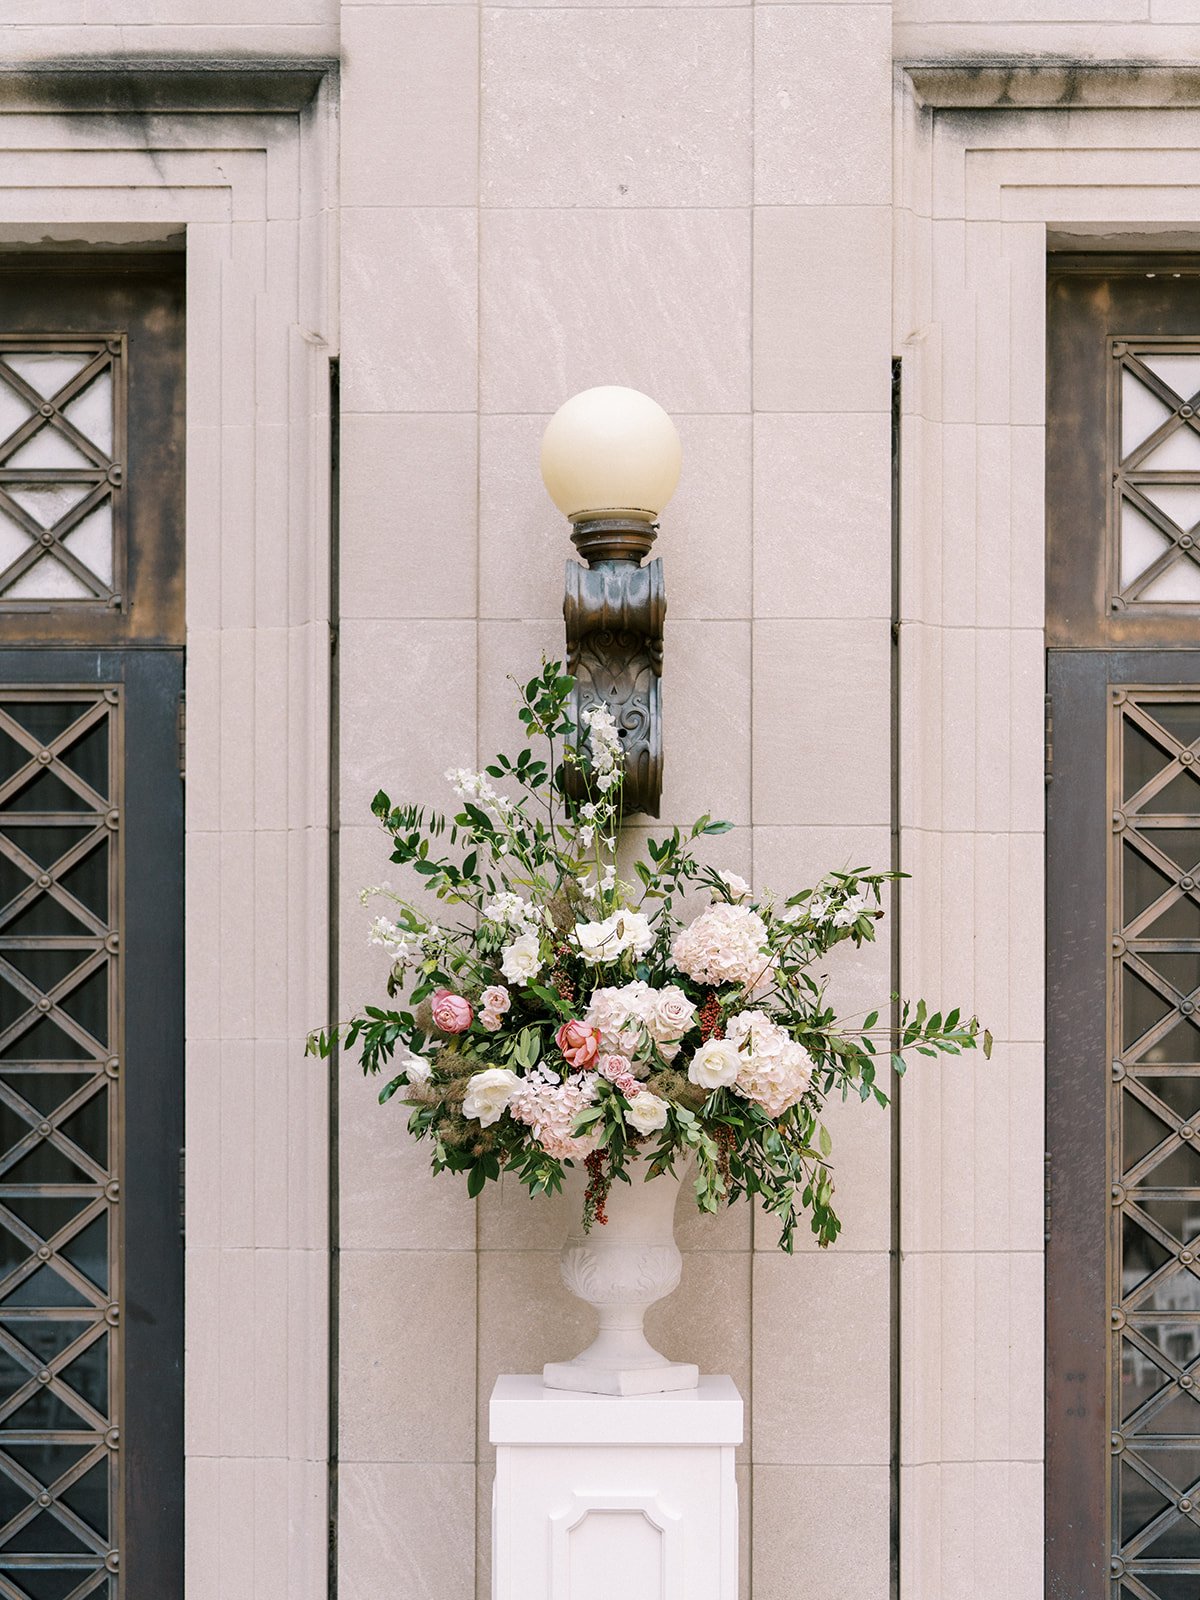 A ceremony backdrop comprised of marble urns filled with overflowing greenery, hydrangea, garden roses, spray roses, and pepper berry. Floral Design by Rosemary and Finch in Nashville, TN.